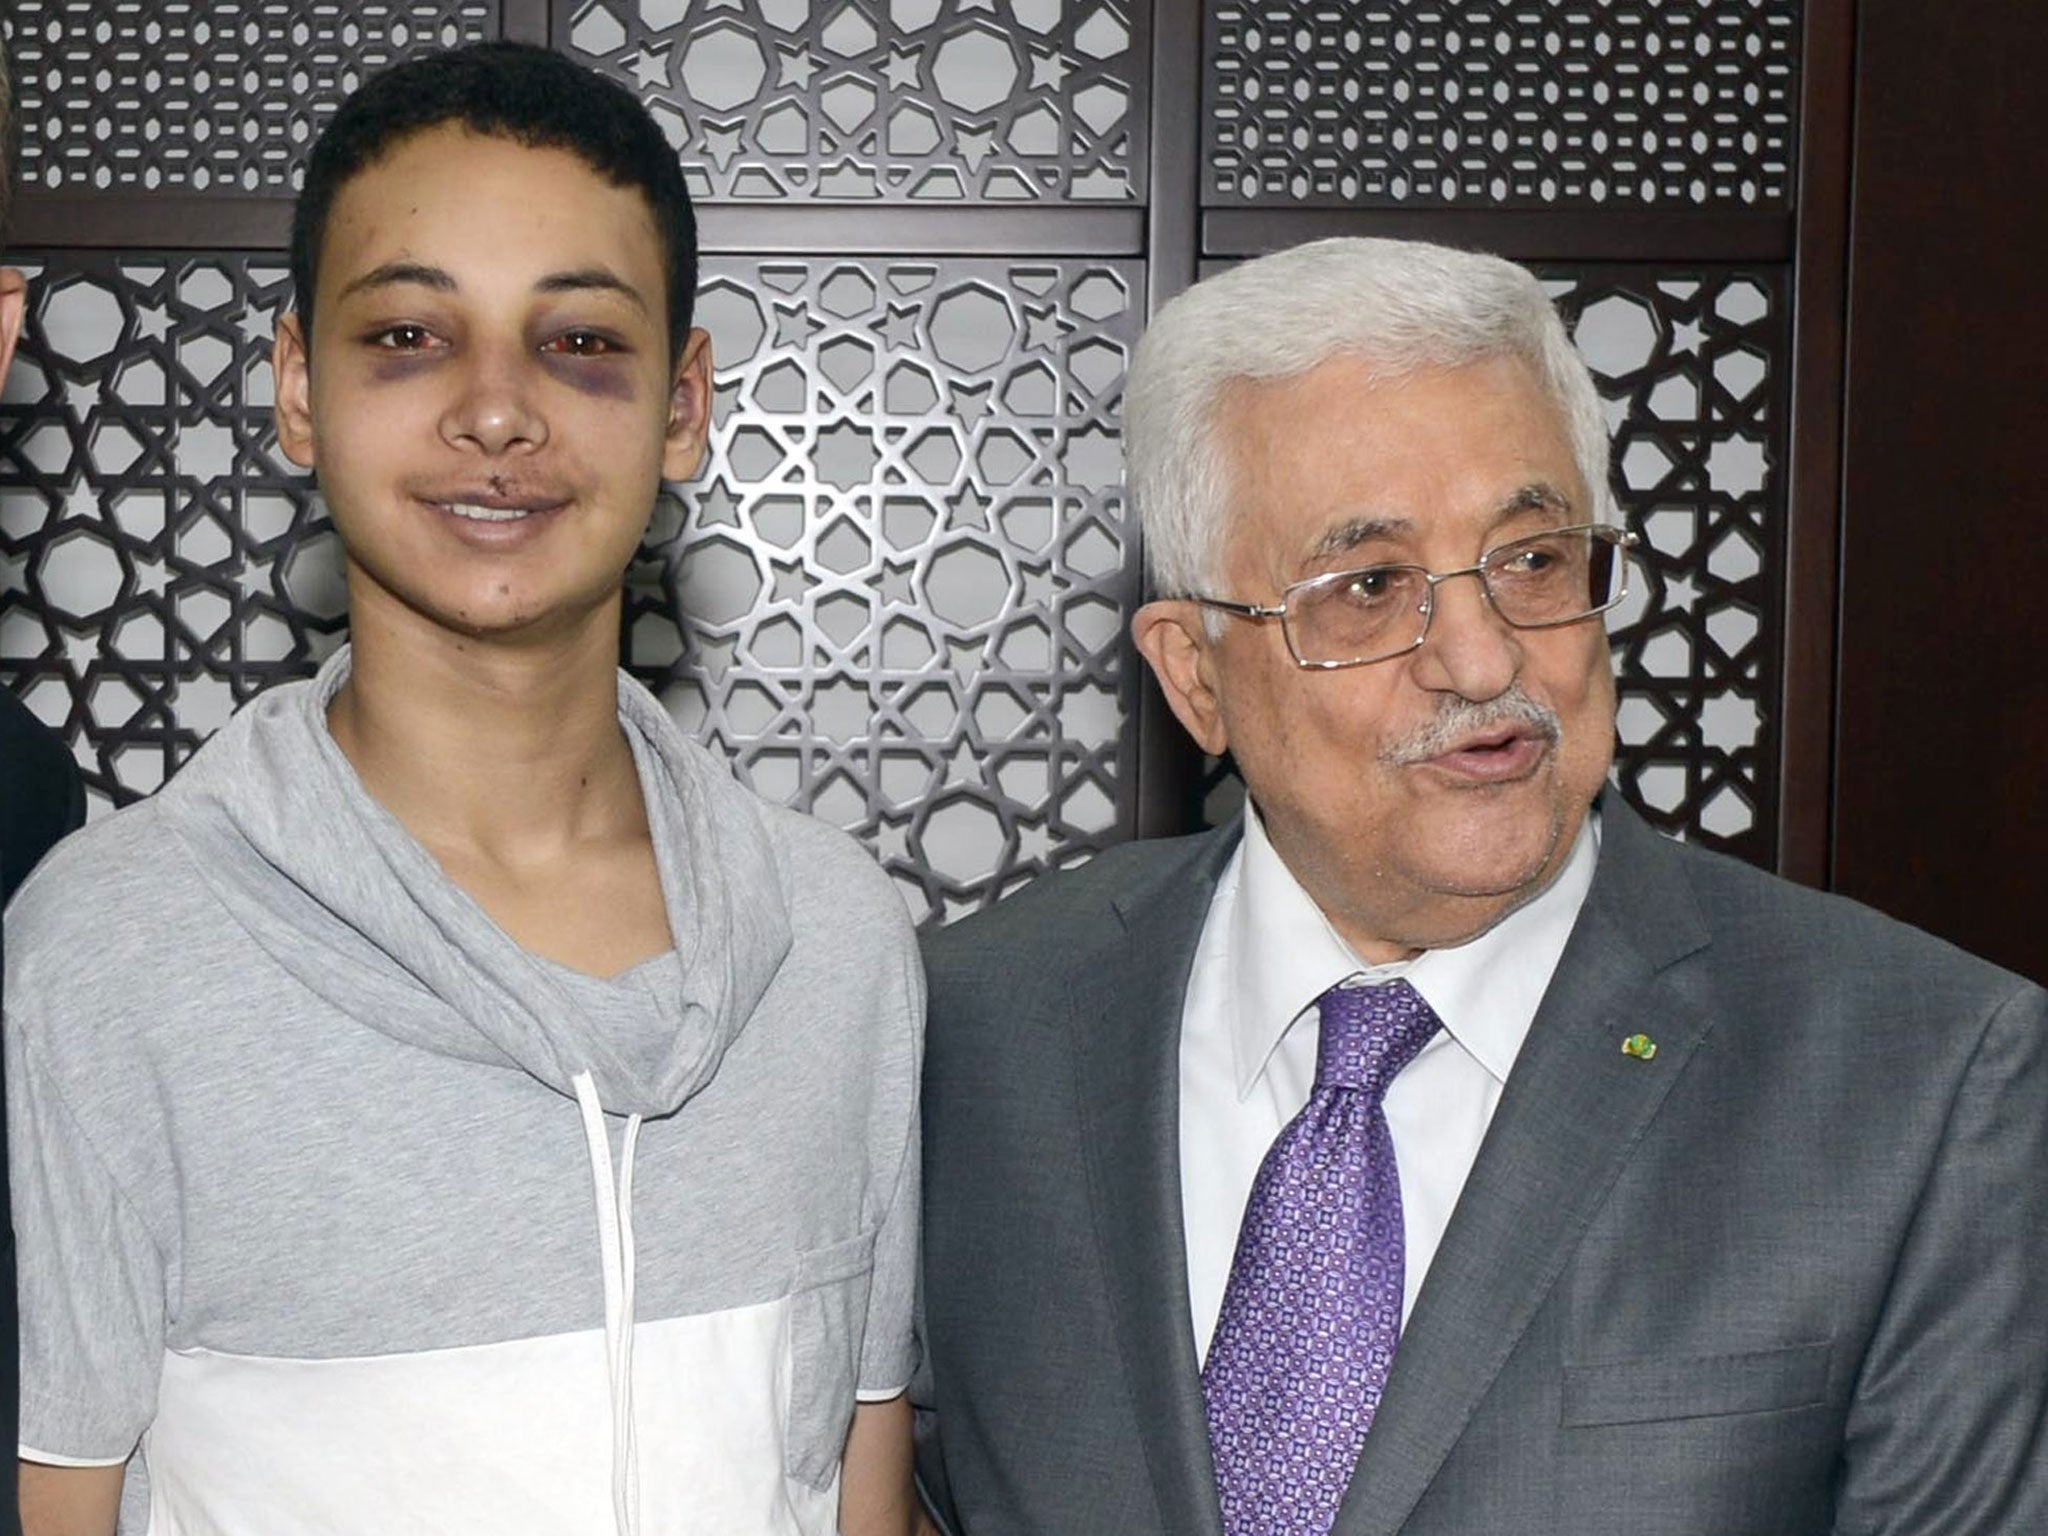 Palestinian President Mahmoud Abbas (R) stands with Tariq Khdeir as he meets with family members of Palestinian teen Mohammed Abu Khdeir in the West Bank city of Ramallah